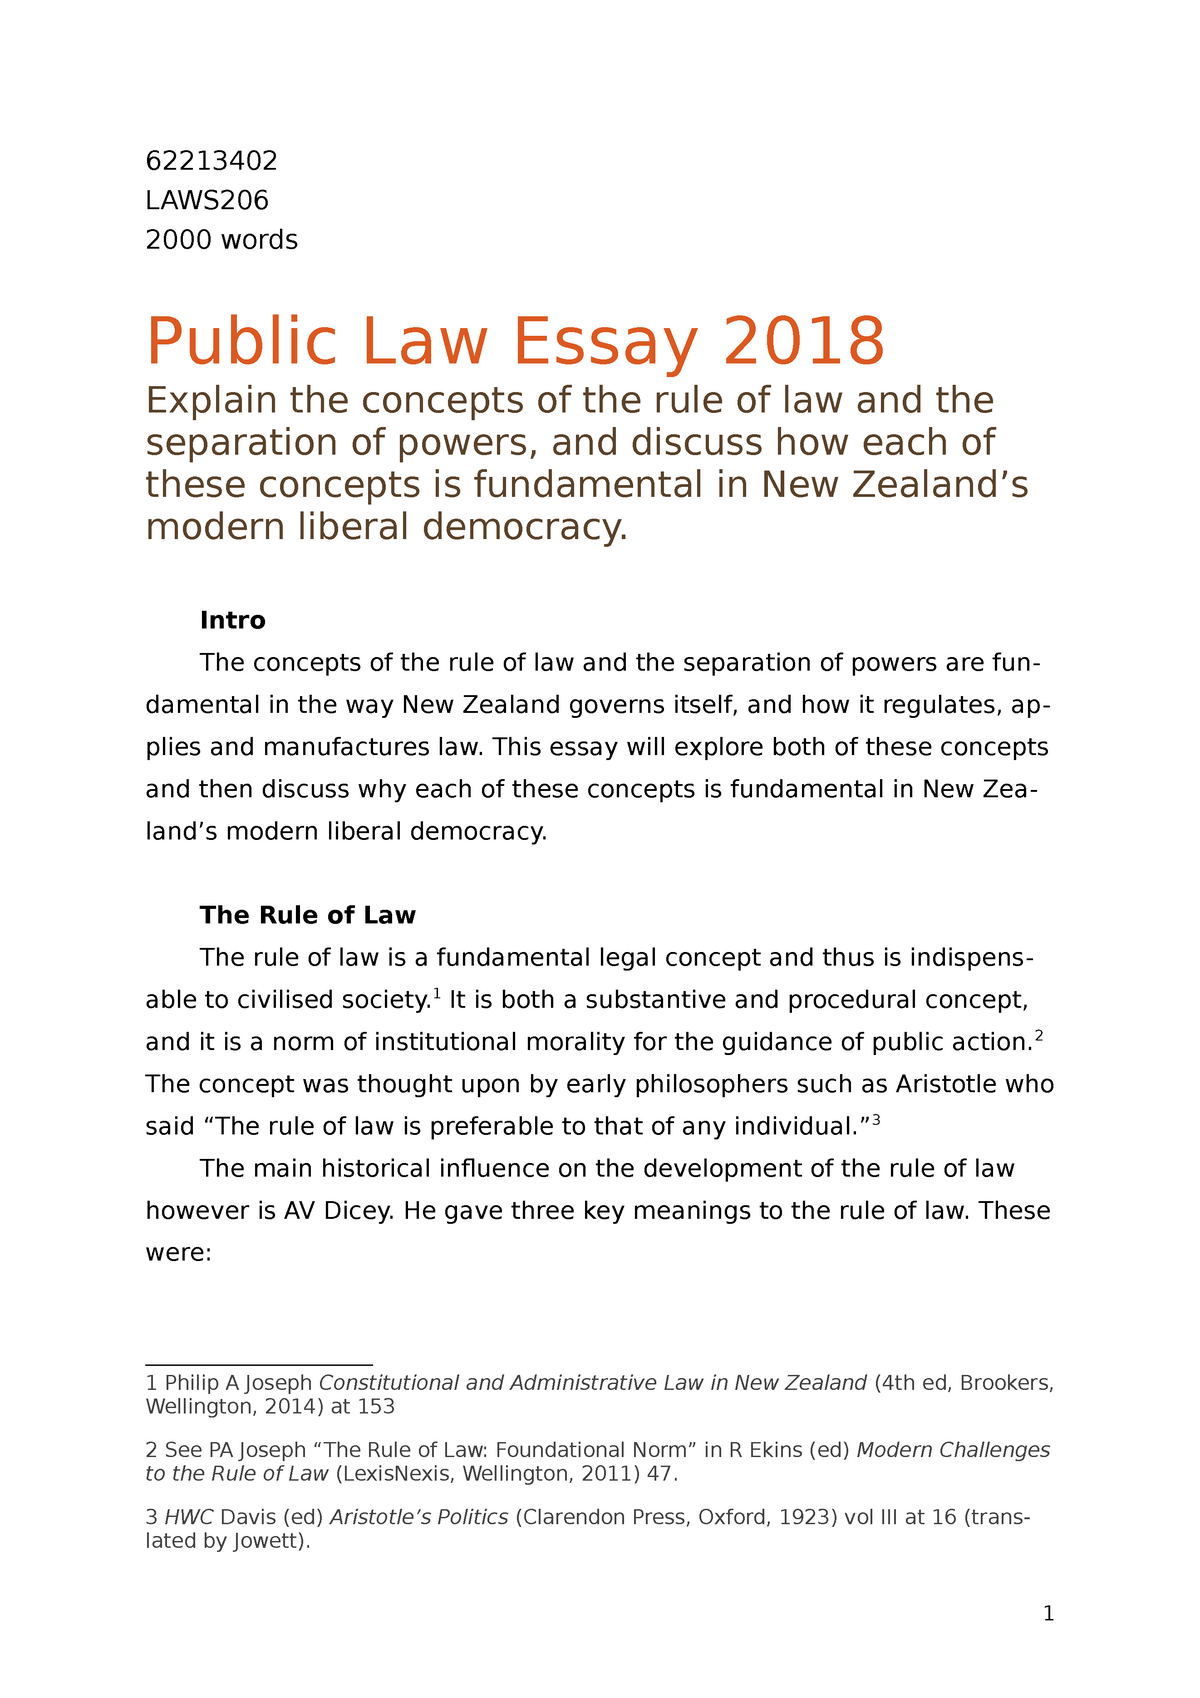 law review and reform essay bpp